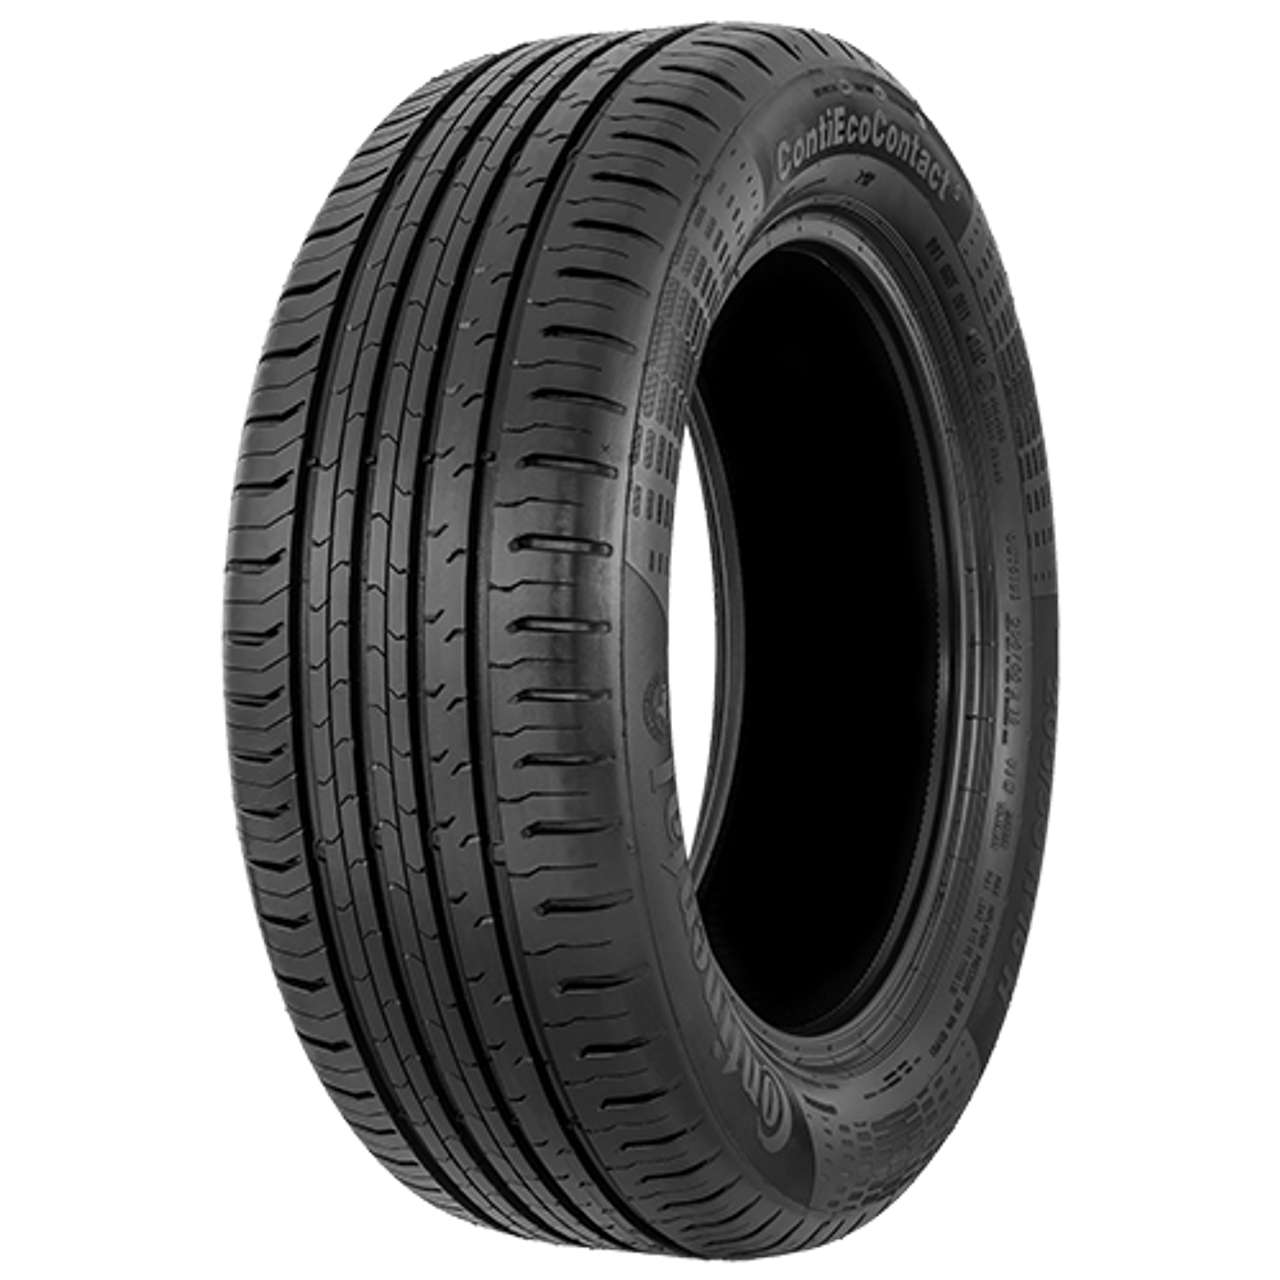 CONTINENTAL CONTIECOCONTACT 5 (TOY) 165/65R14 83T von Continental